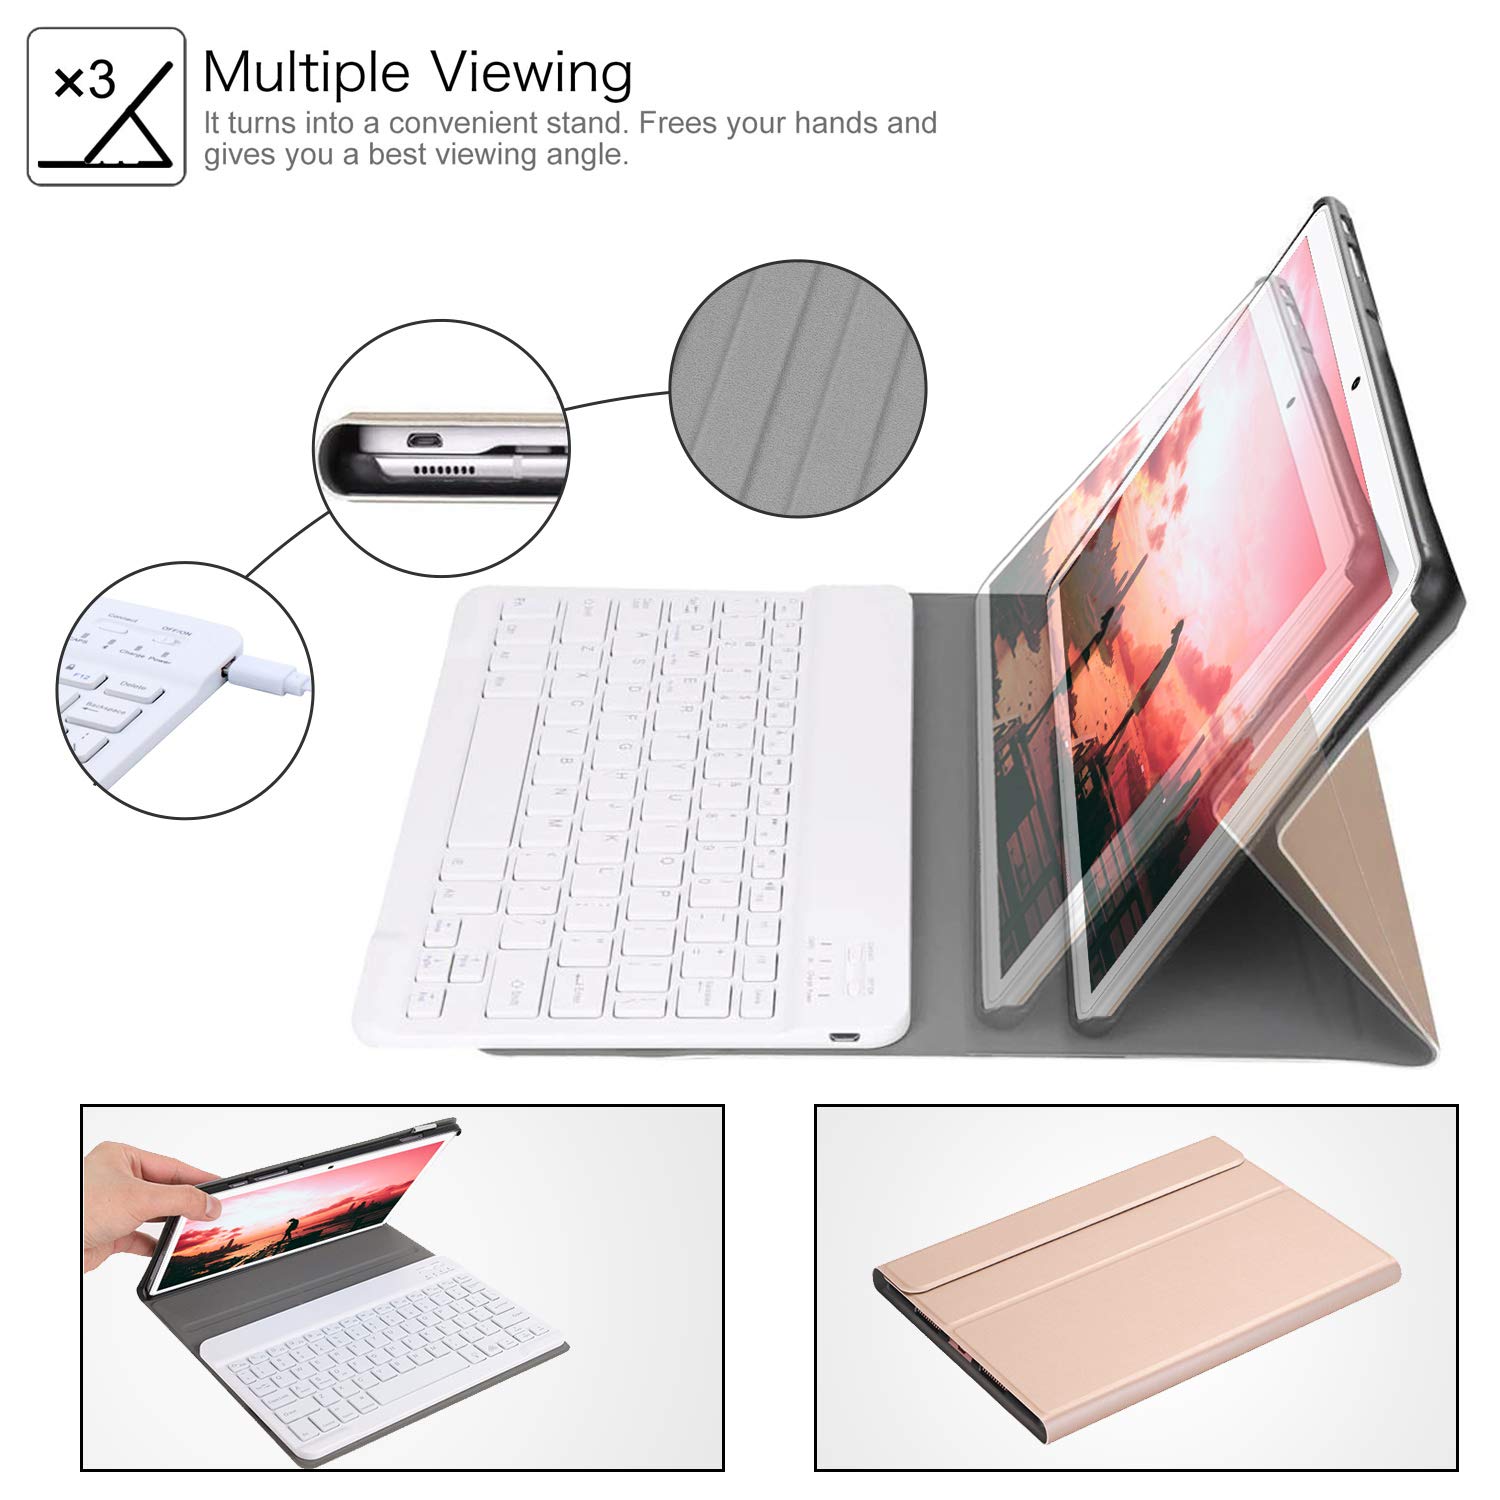 2 in 1 Tablet 10.1 Inch, High Performance Android 10.0 Tablet,64GB ROM 128GB Expand, Dual Camera,Dual 4G Cellular Tablet with Keyboard,Support Dual SimCard,8000mAh,HD/IPS,Bluetooth,GPS,WiFi,FM